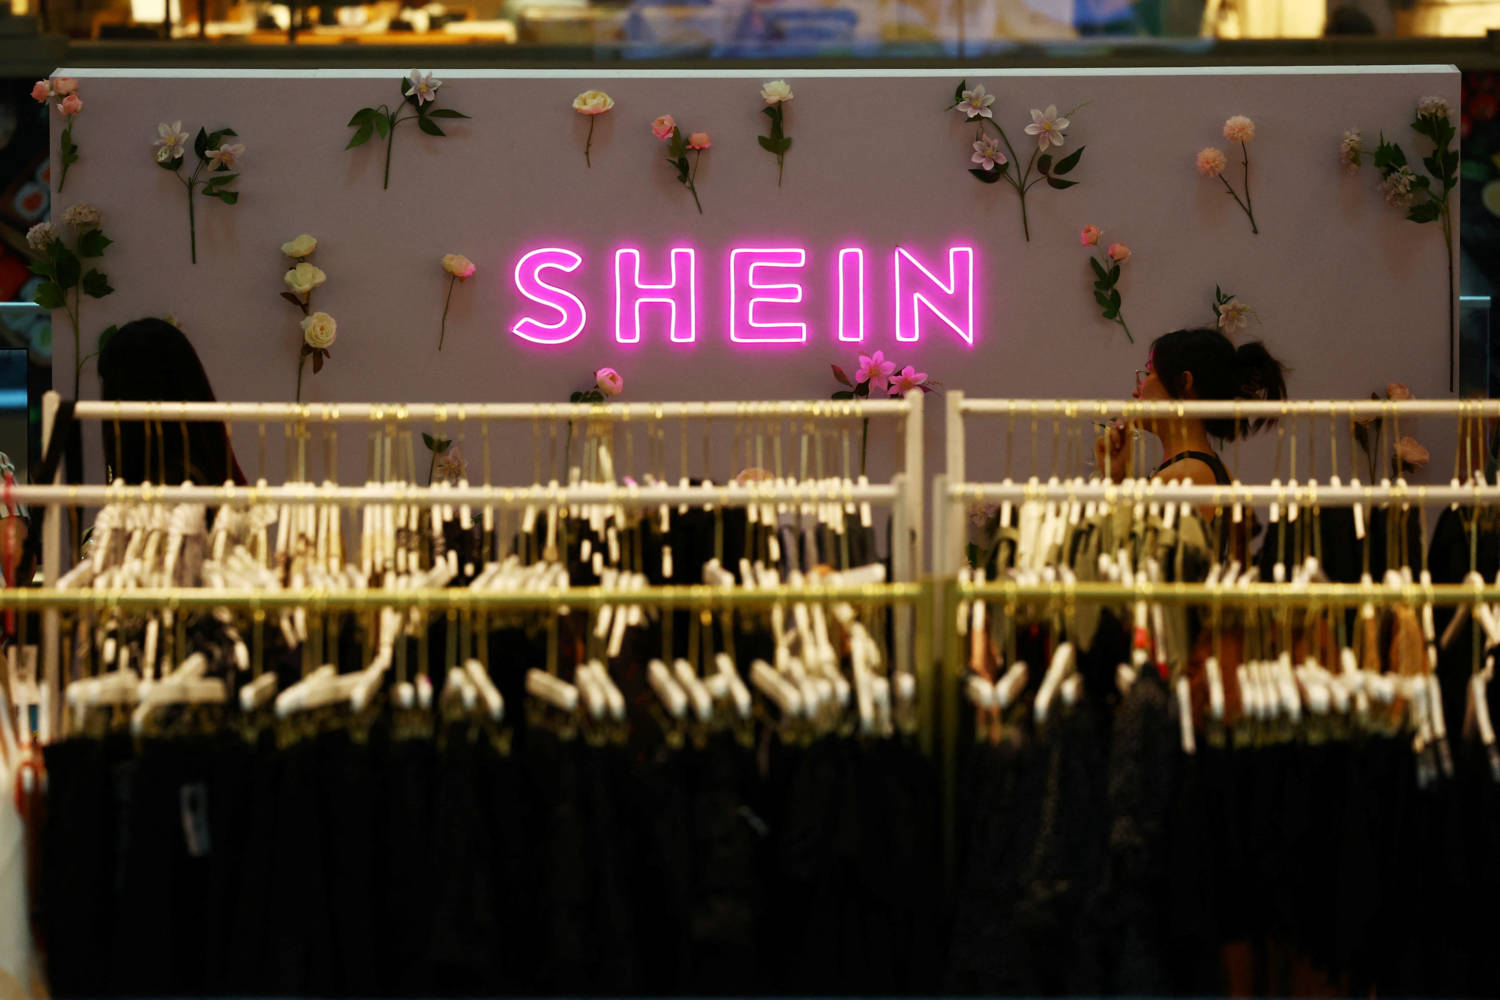 A View Of A Shein Pop Up Store At A Mall In Singapore